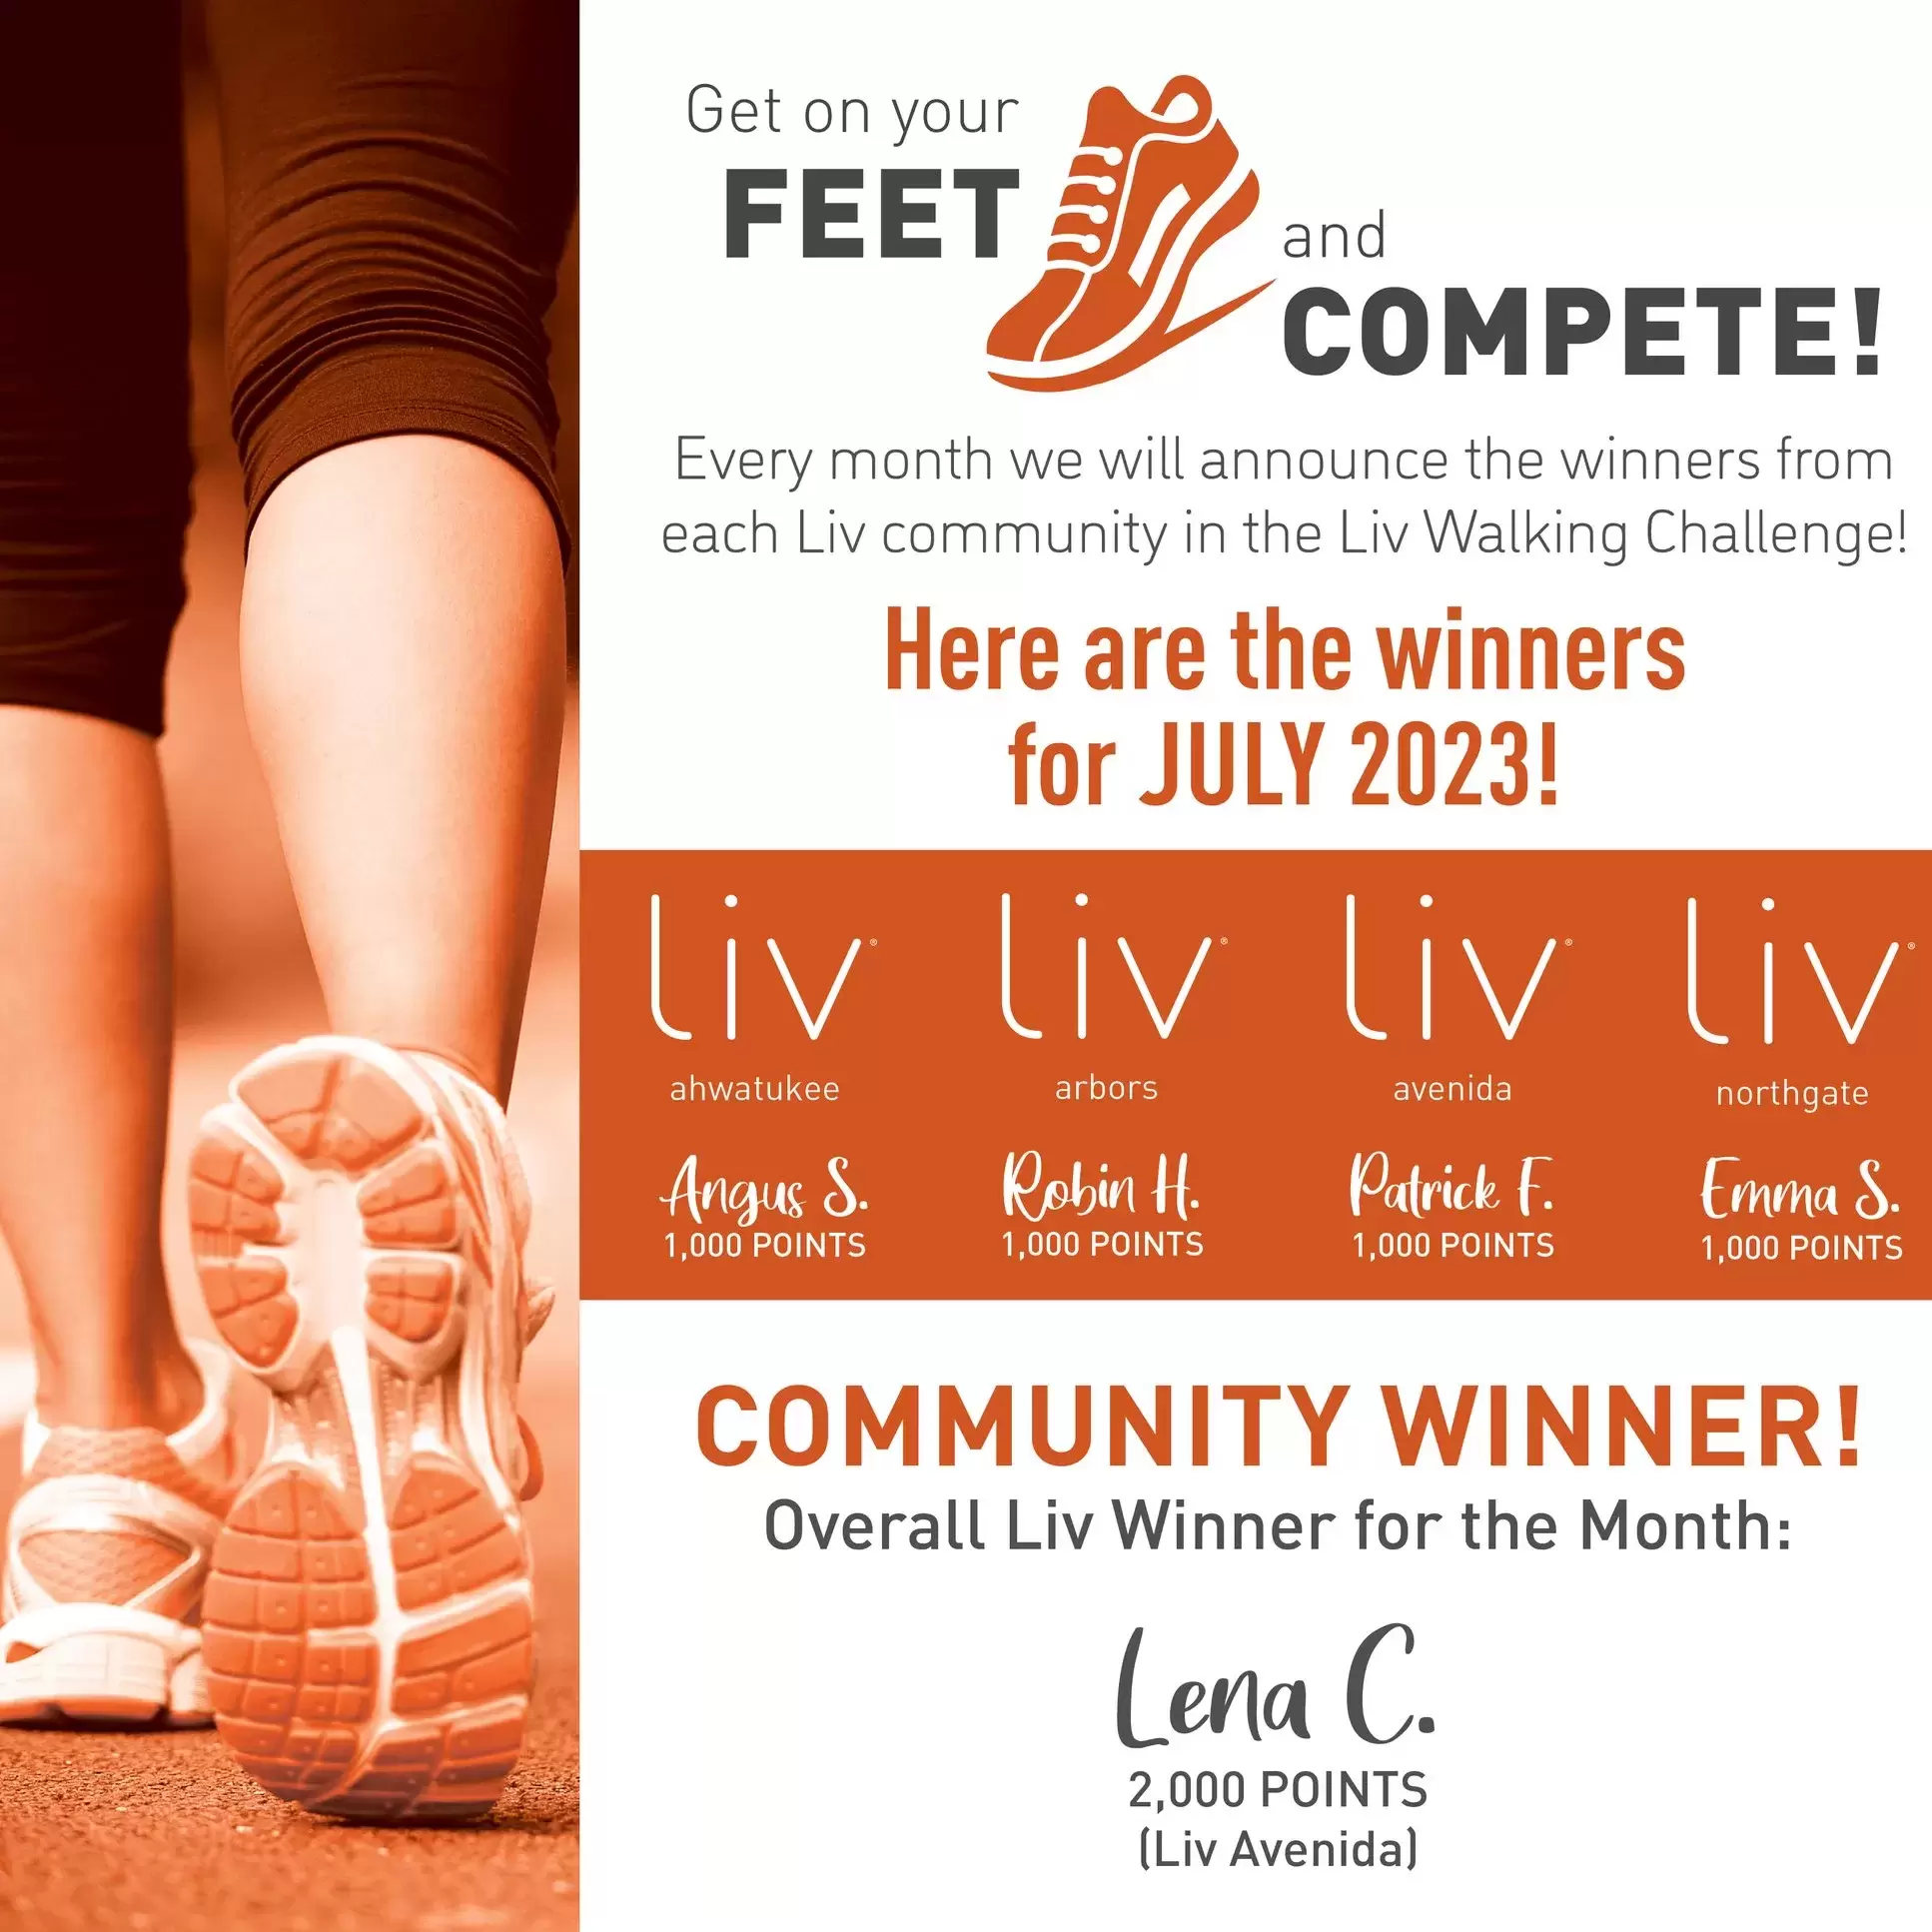 Big Shout Out to our Walking Challenge Winners for July! 👟👟👟🙌🙌🙌
You can still get in on the fun for August! Track your miles walked and send them in to livwalkingchallenge@livcommunities.com every Sunday to stay in the competition.